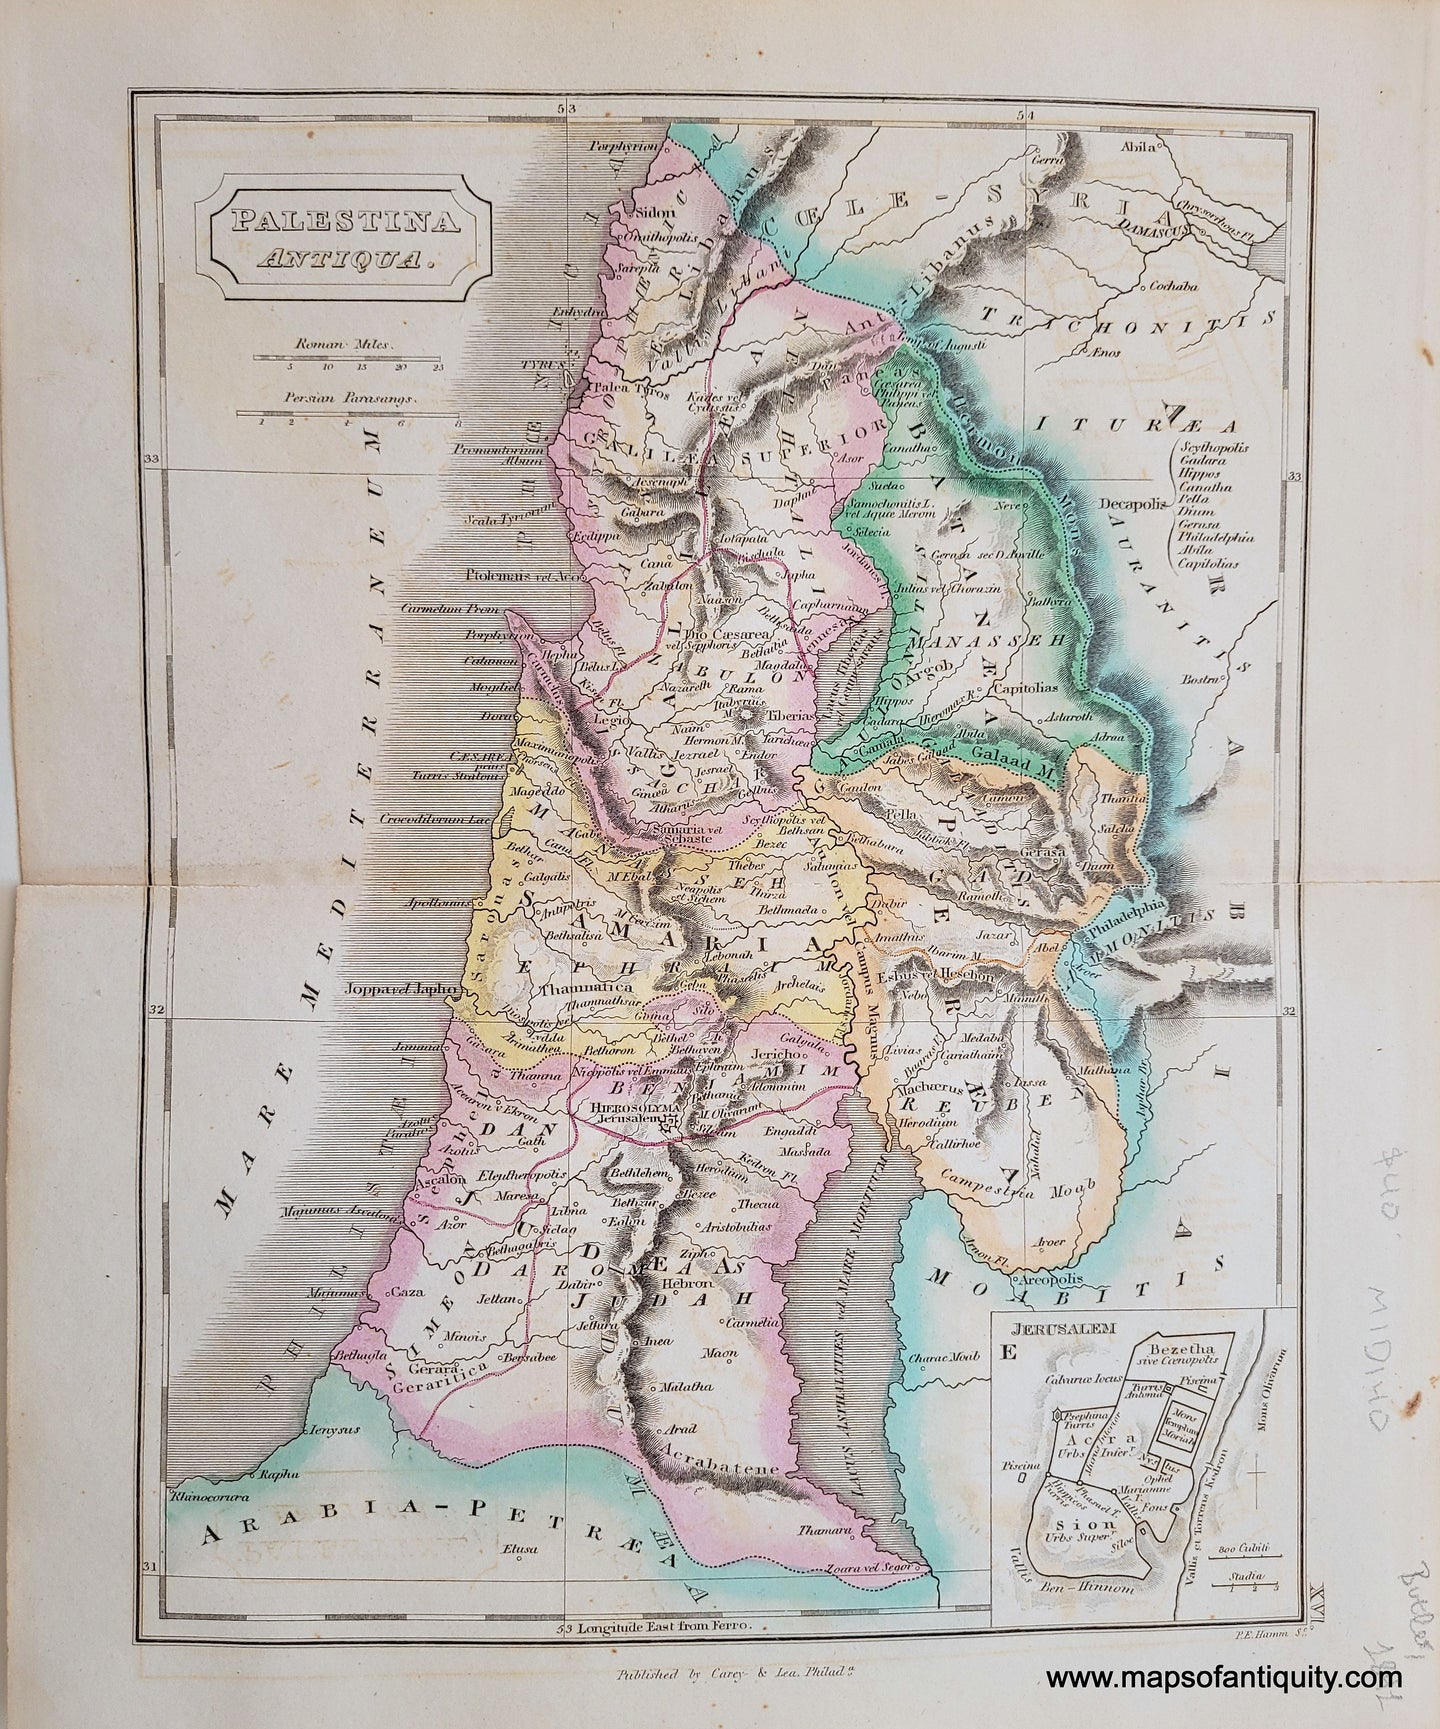 Antique-Hand-Colored-Map-Palestina-Antiqua-**********-Ancient-World-Middle-East-&-Holy-Land--1841-Butler-Maps-Of-Antiquity